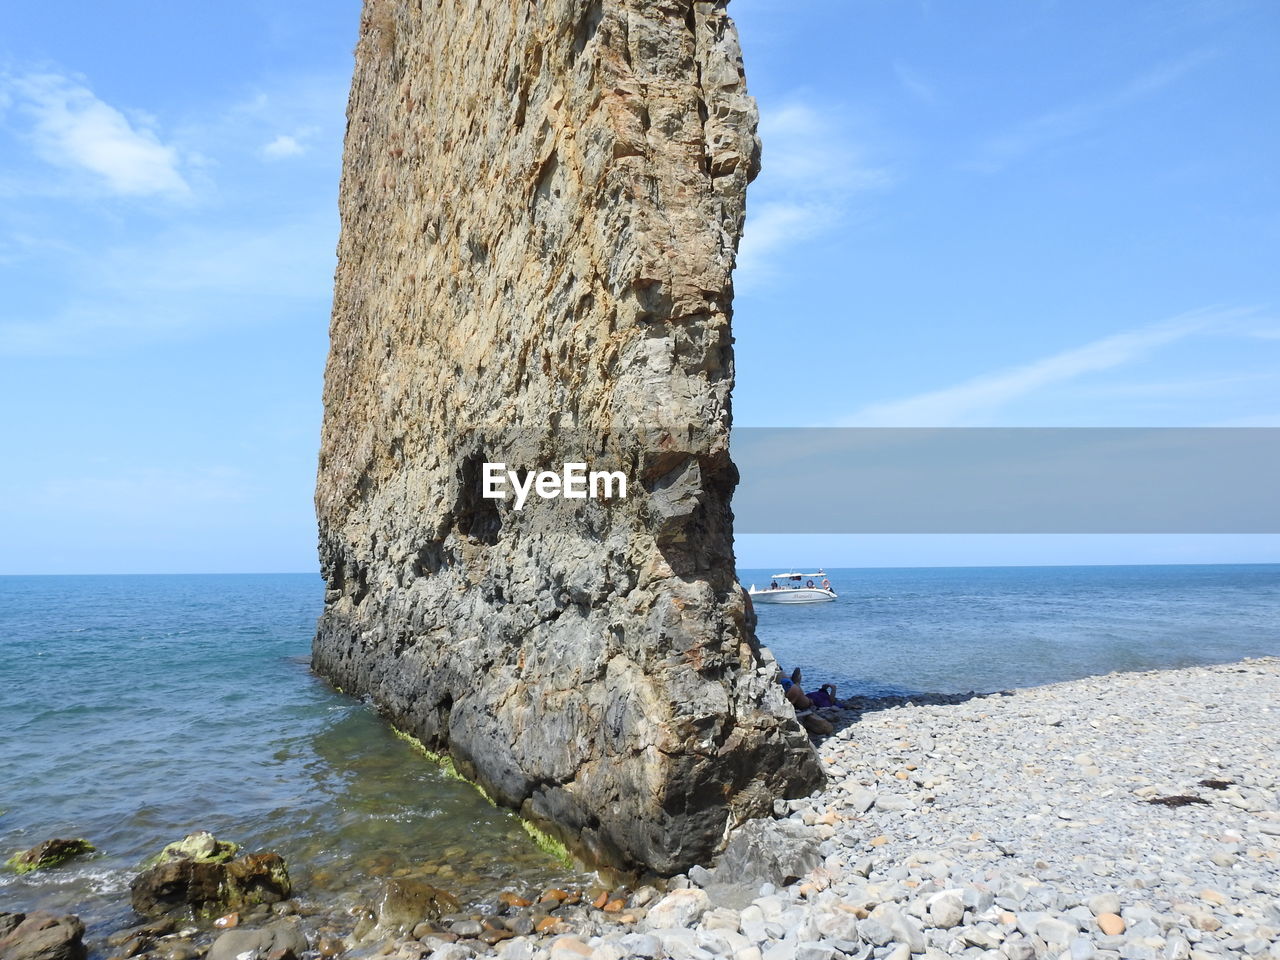 SCENIC VIEW OF ROCKY BEACH AGAINST SKY